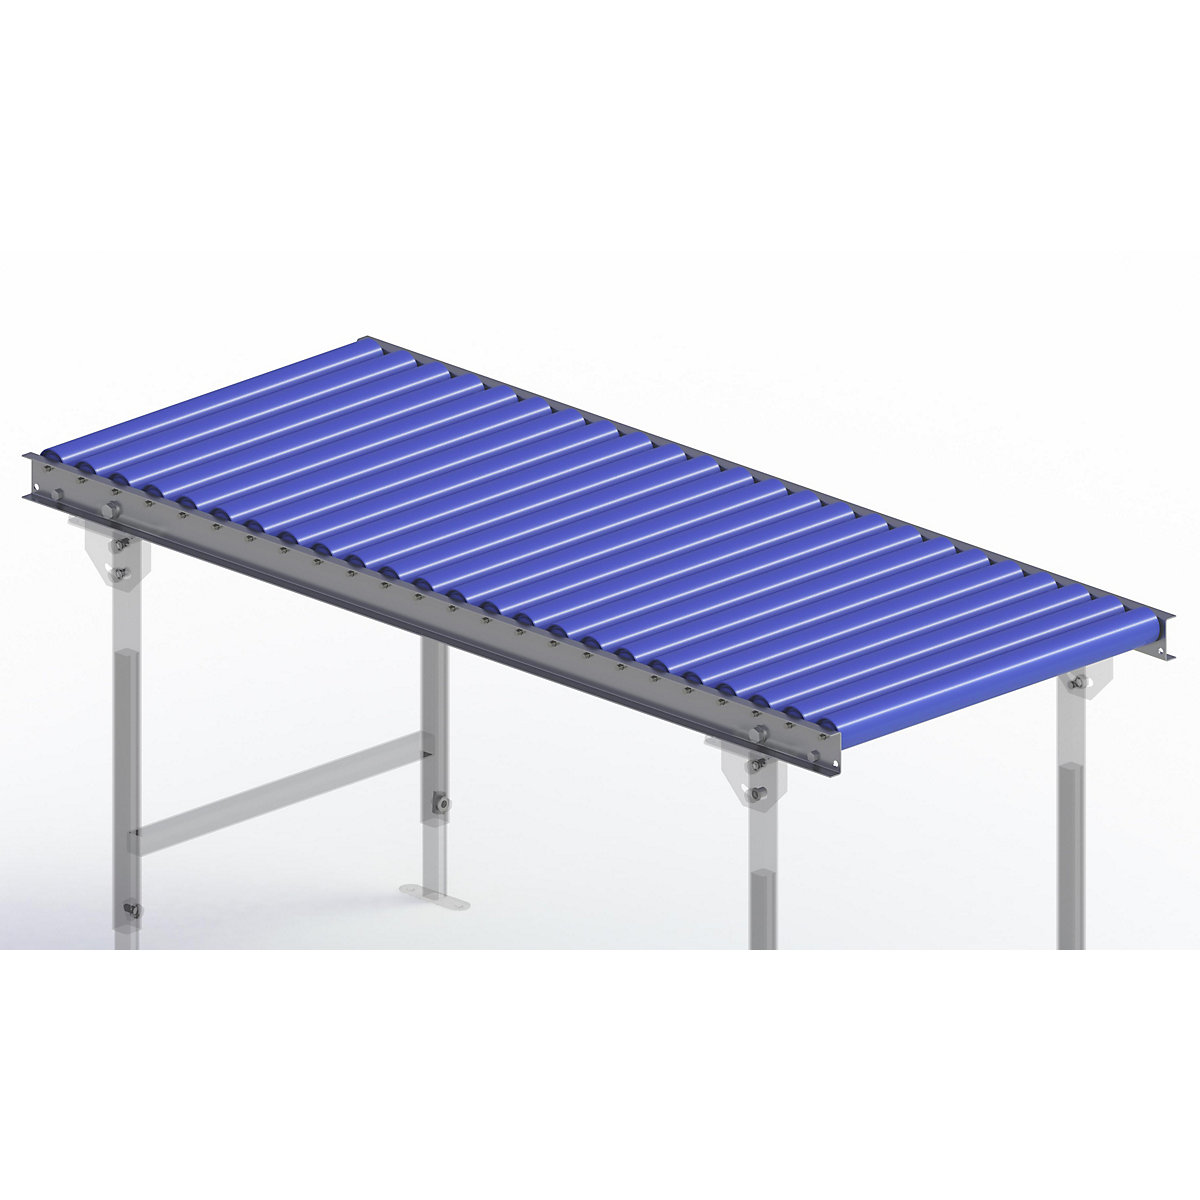 Gura – Light duty roller conveyor, steel frame with plastic rollers, track width 600 mm, axle spacing 62.5 mm, length 1.5 m